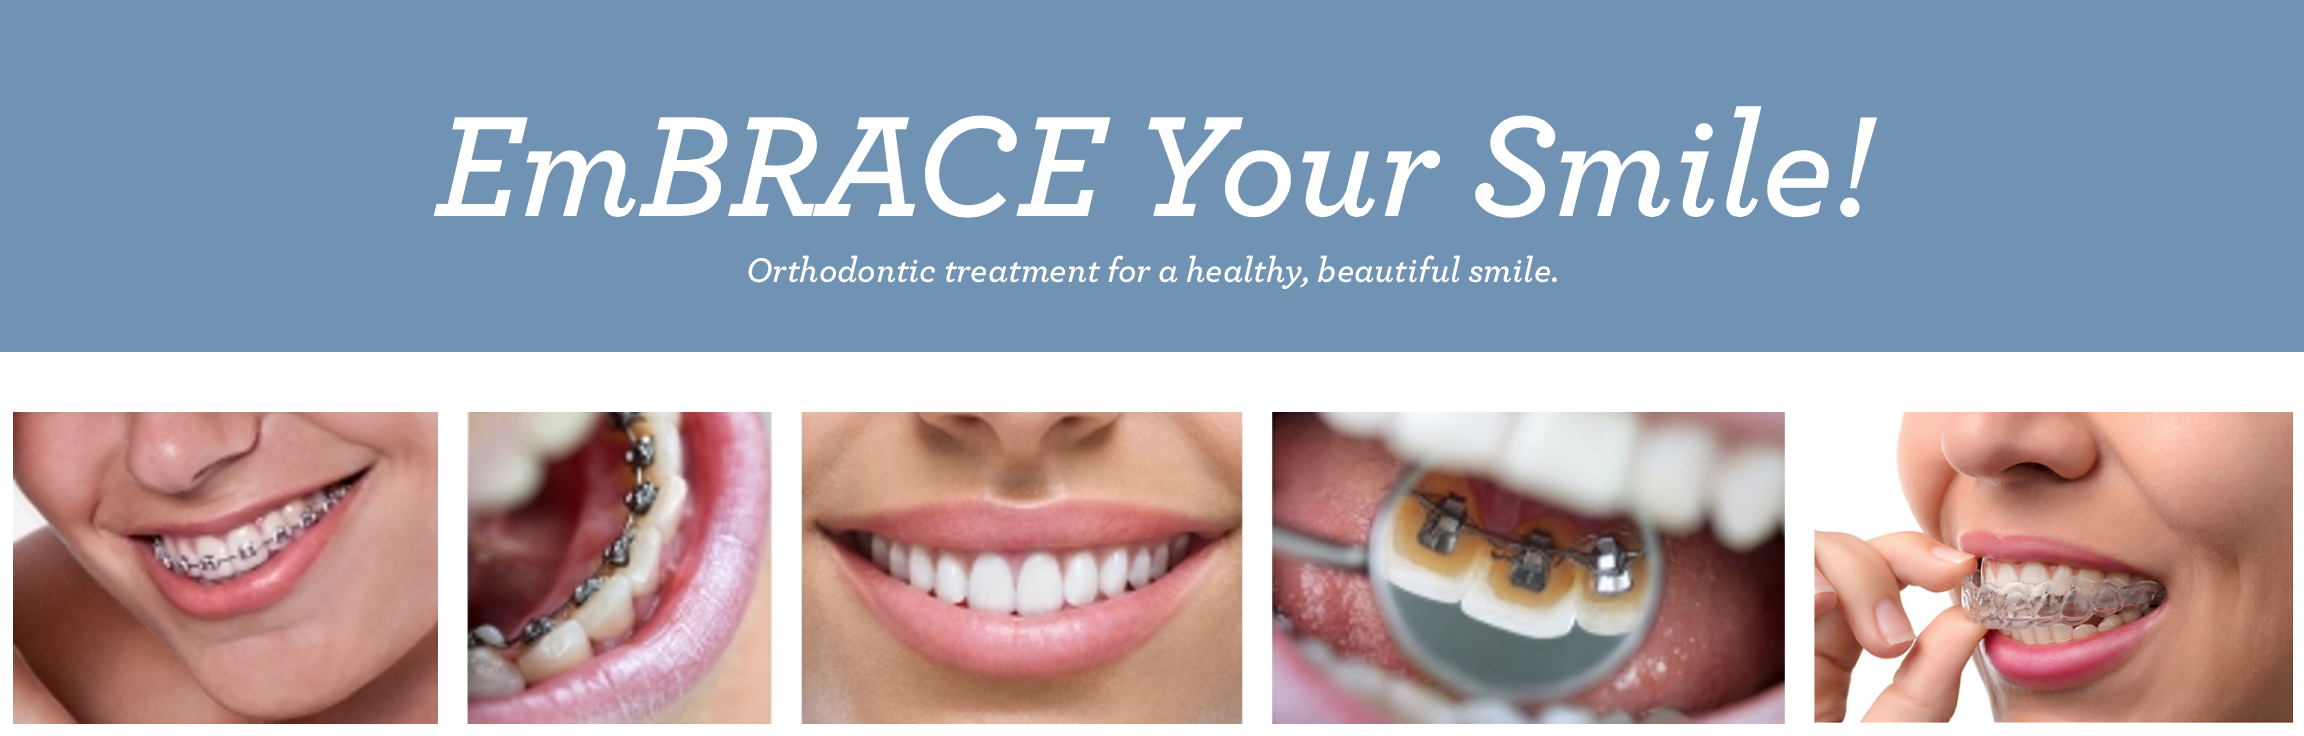 Orthodontists in Ohio Cleveland